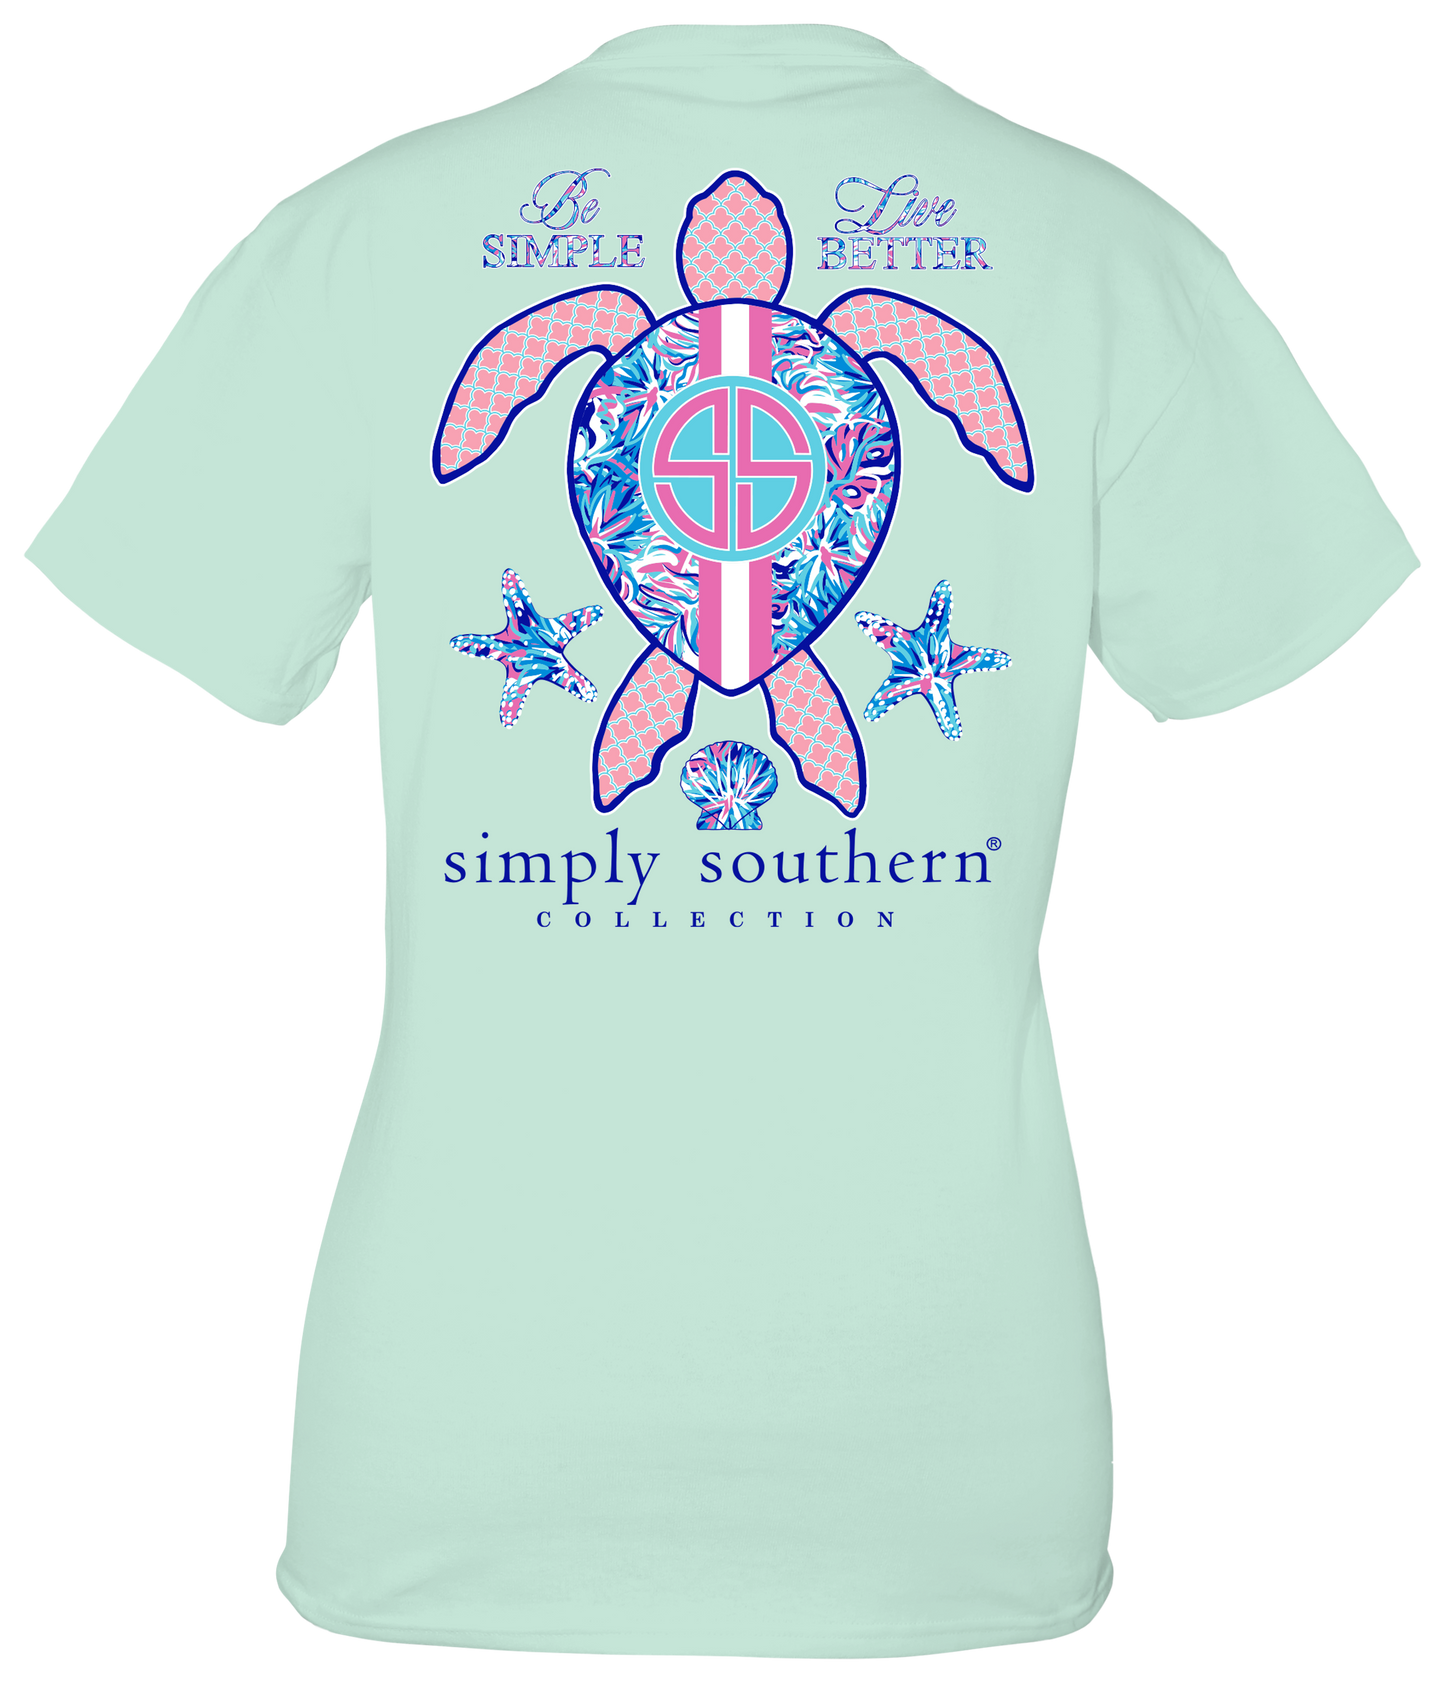 "Be Simple Live Better" Shirt